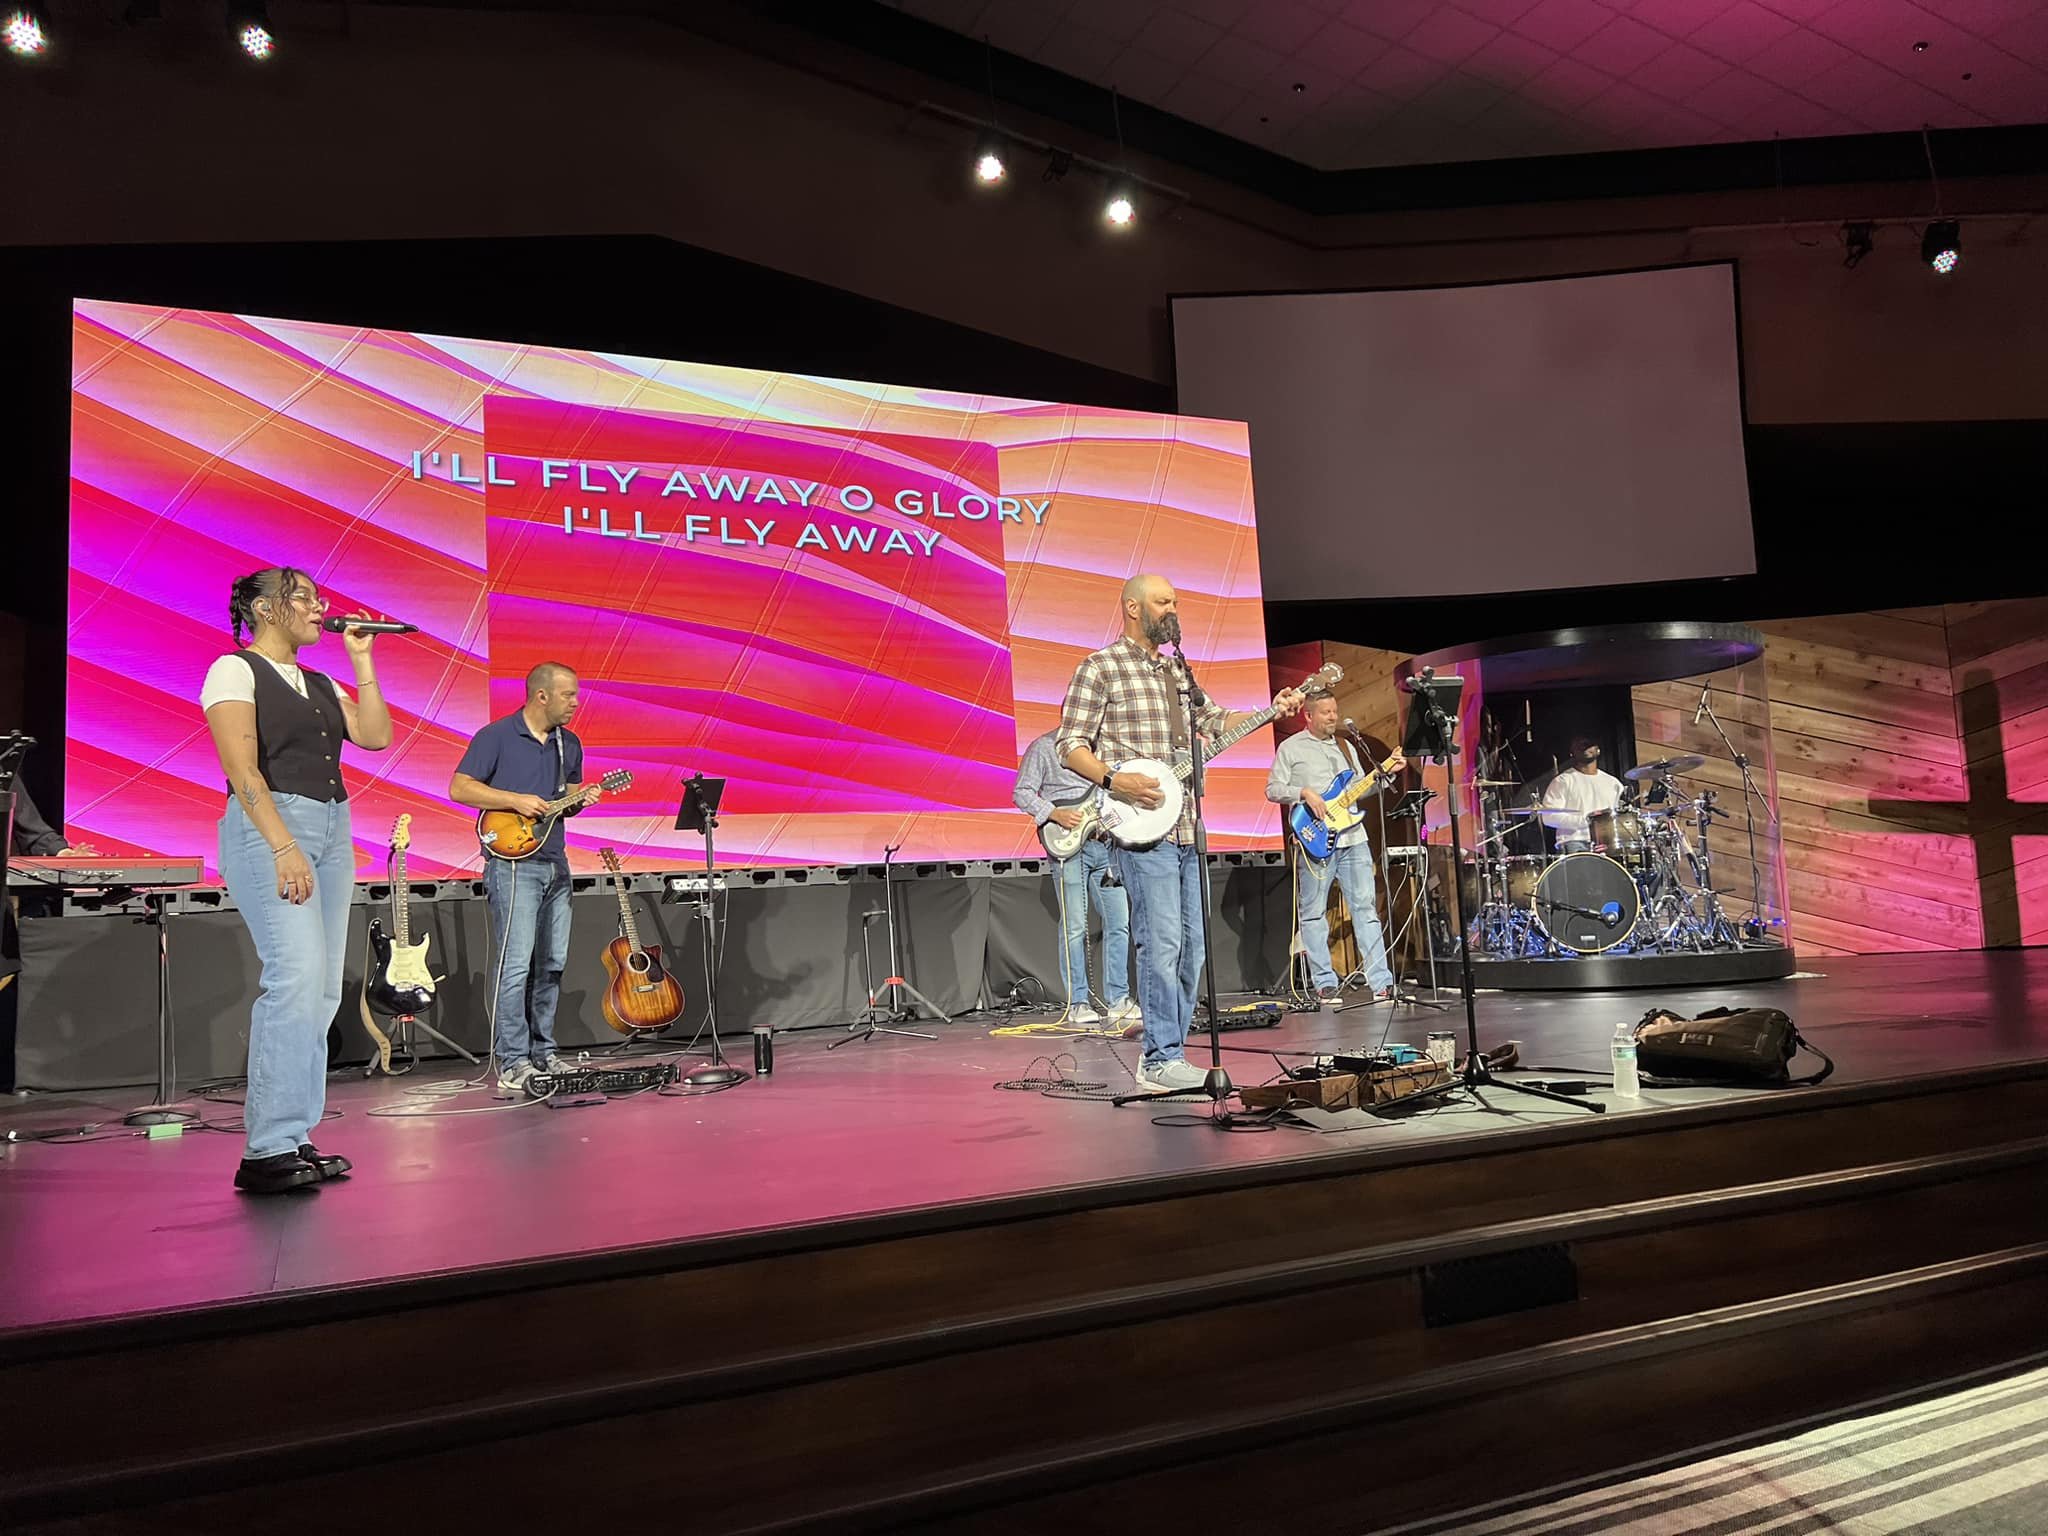 Feels like a great morning for a little bluegrass during worship!

See you at 9:30 or 11:00!